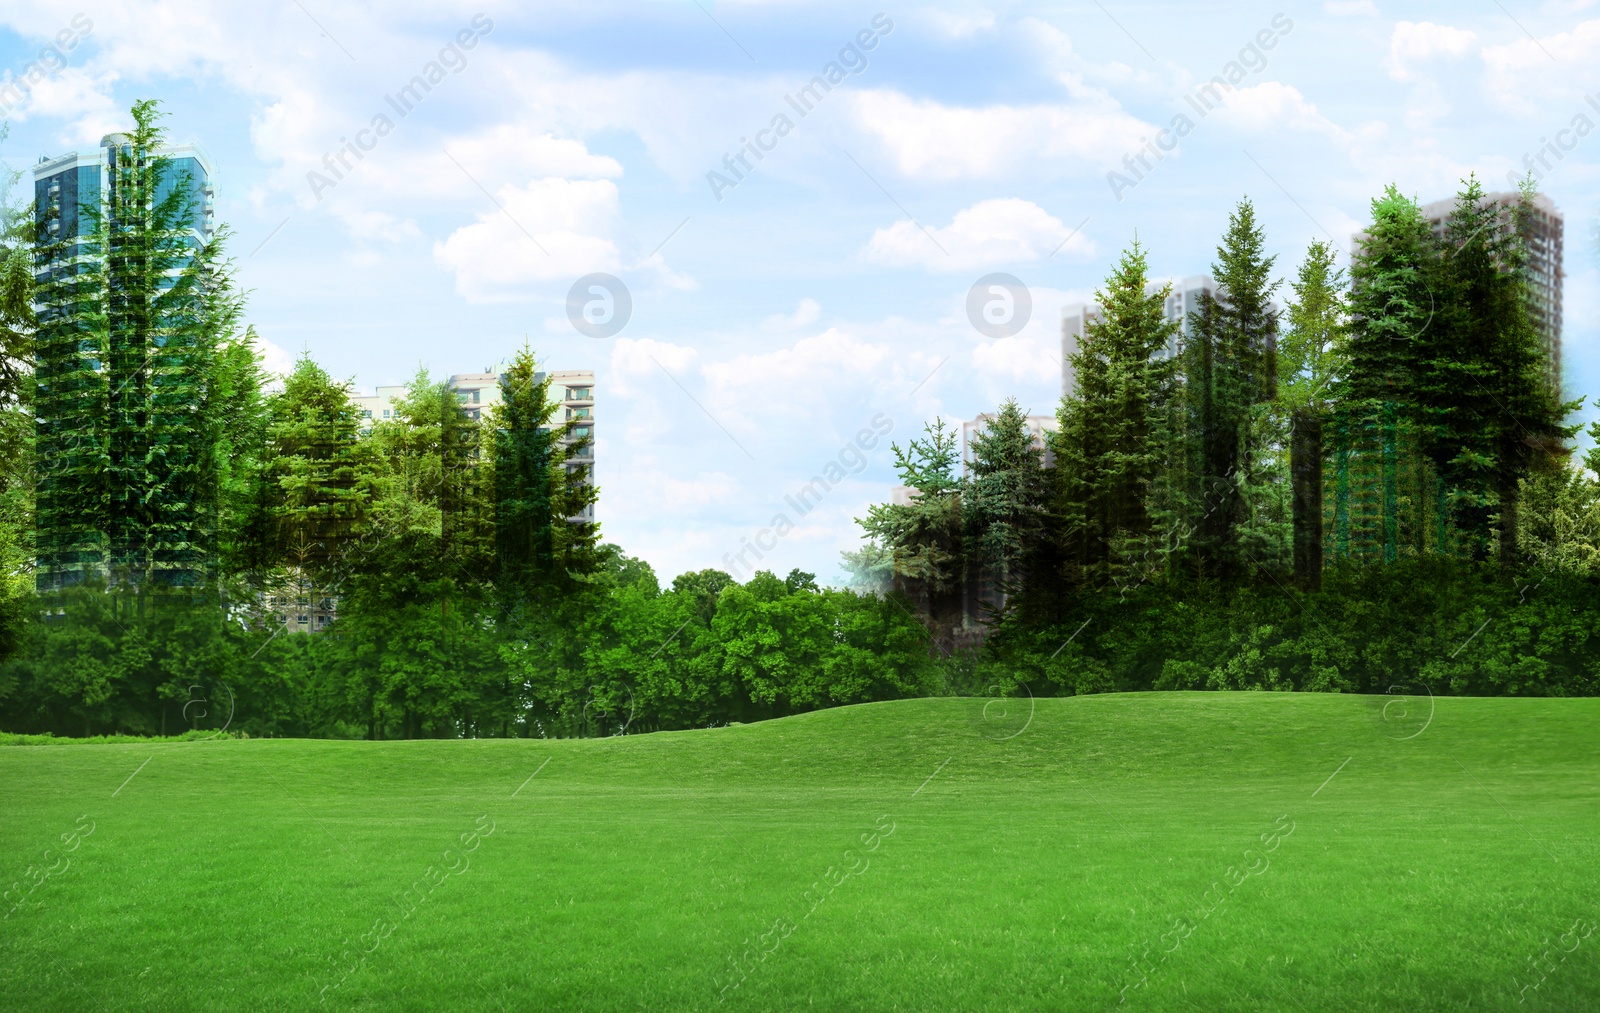 Image of Double exposure of green forest and cityscape with buildings